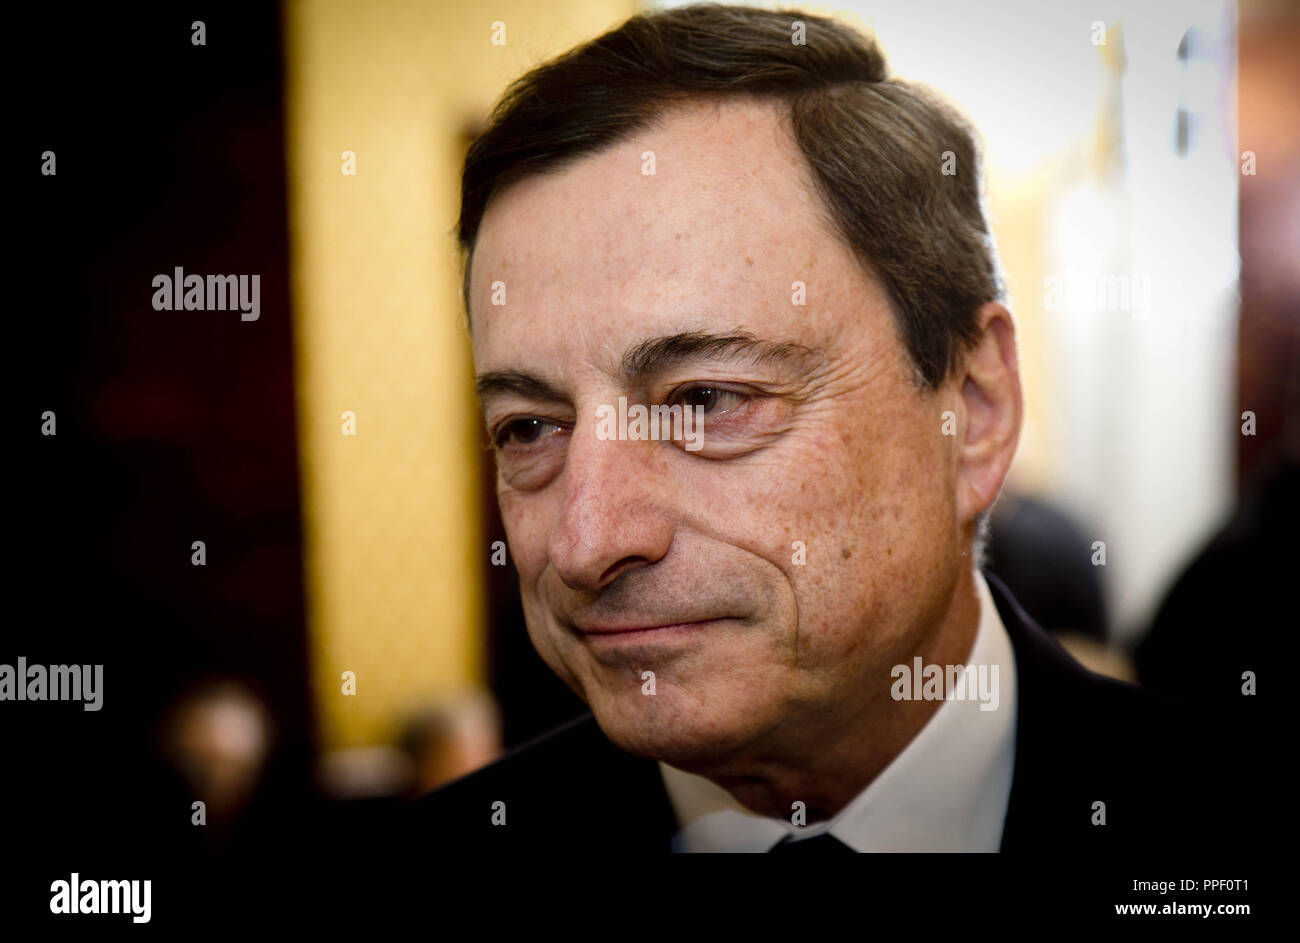 Mario Draghi, President of the European Central Bank (ECB), on the Finance Day of the Sueddeutsche Zeitung in Frankfurt am Main. Stock Photo